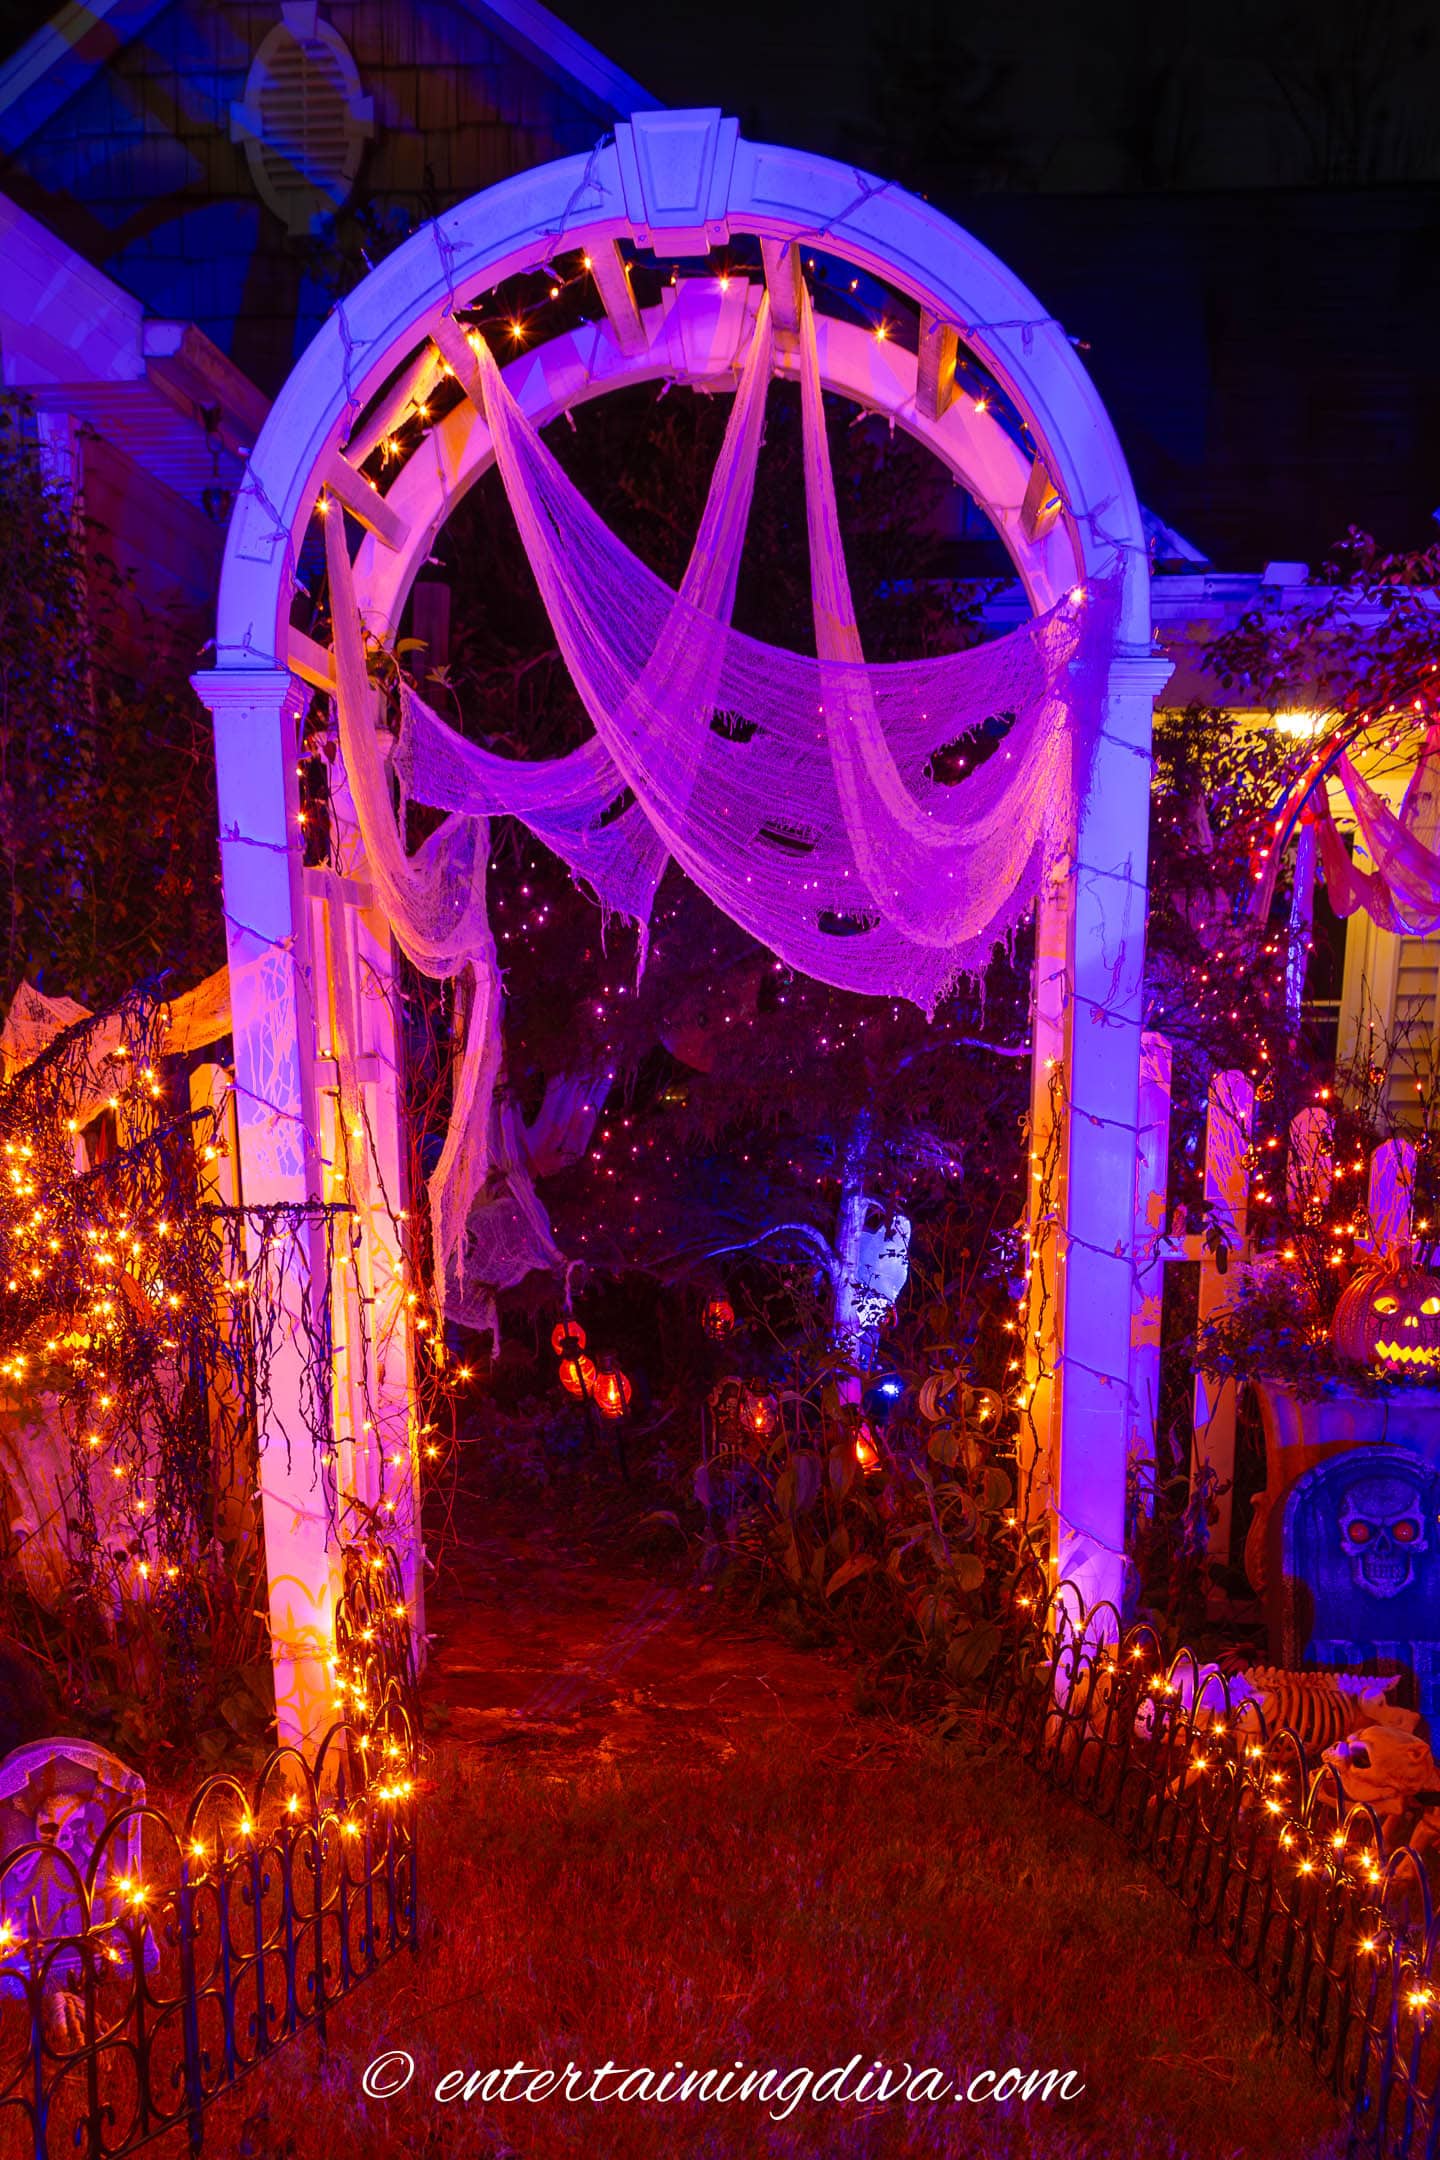 Front yard arbor decorated with white creepy cloth and lit with outdoor Halloween flood lights in blue, purple and pink